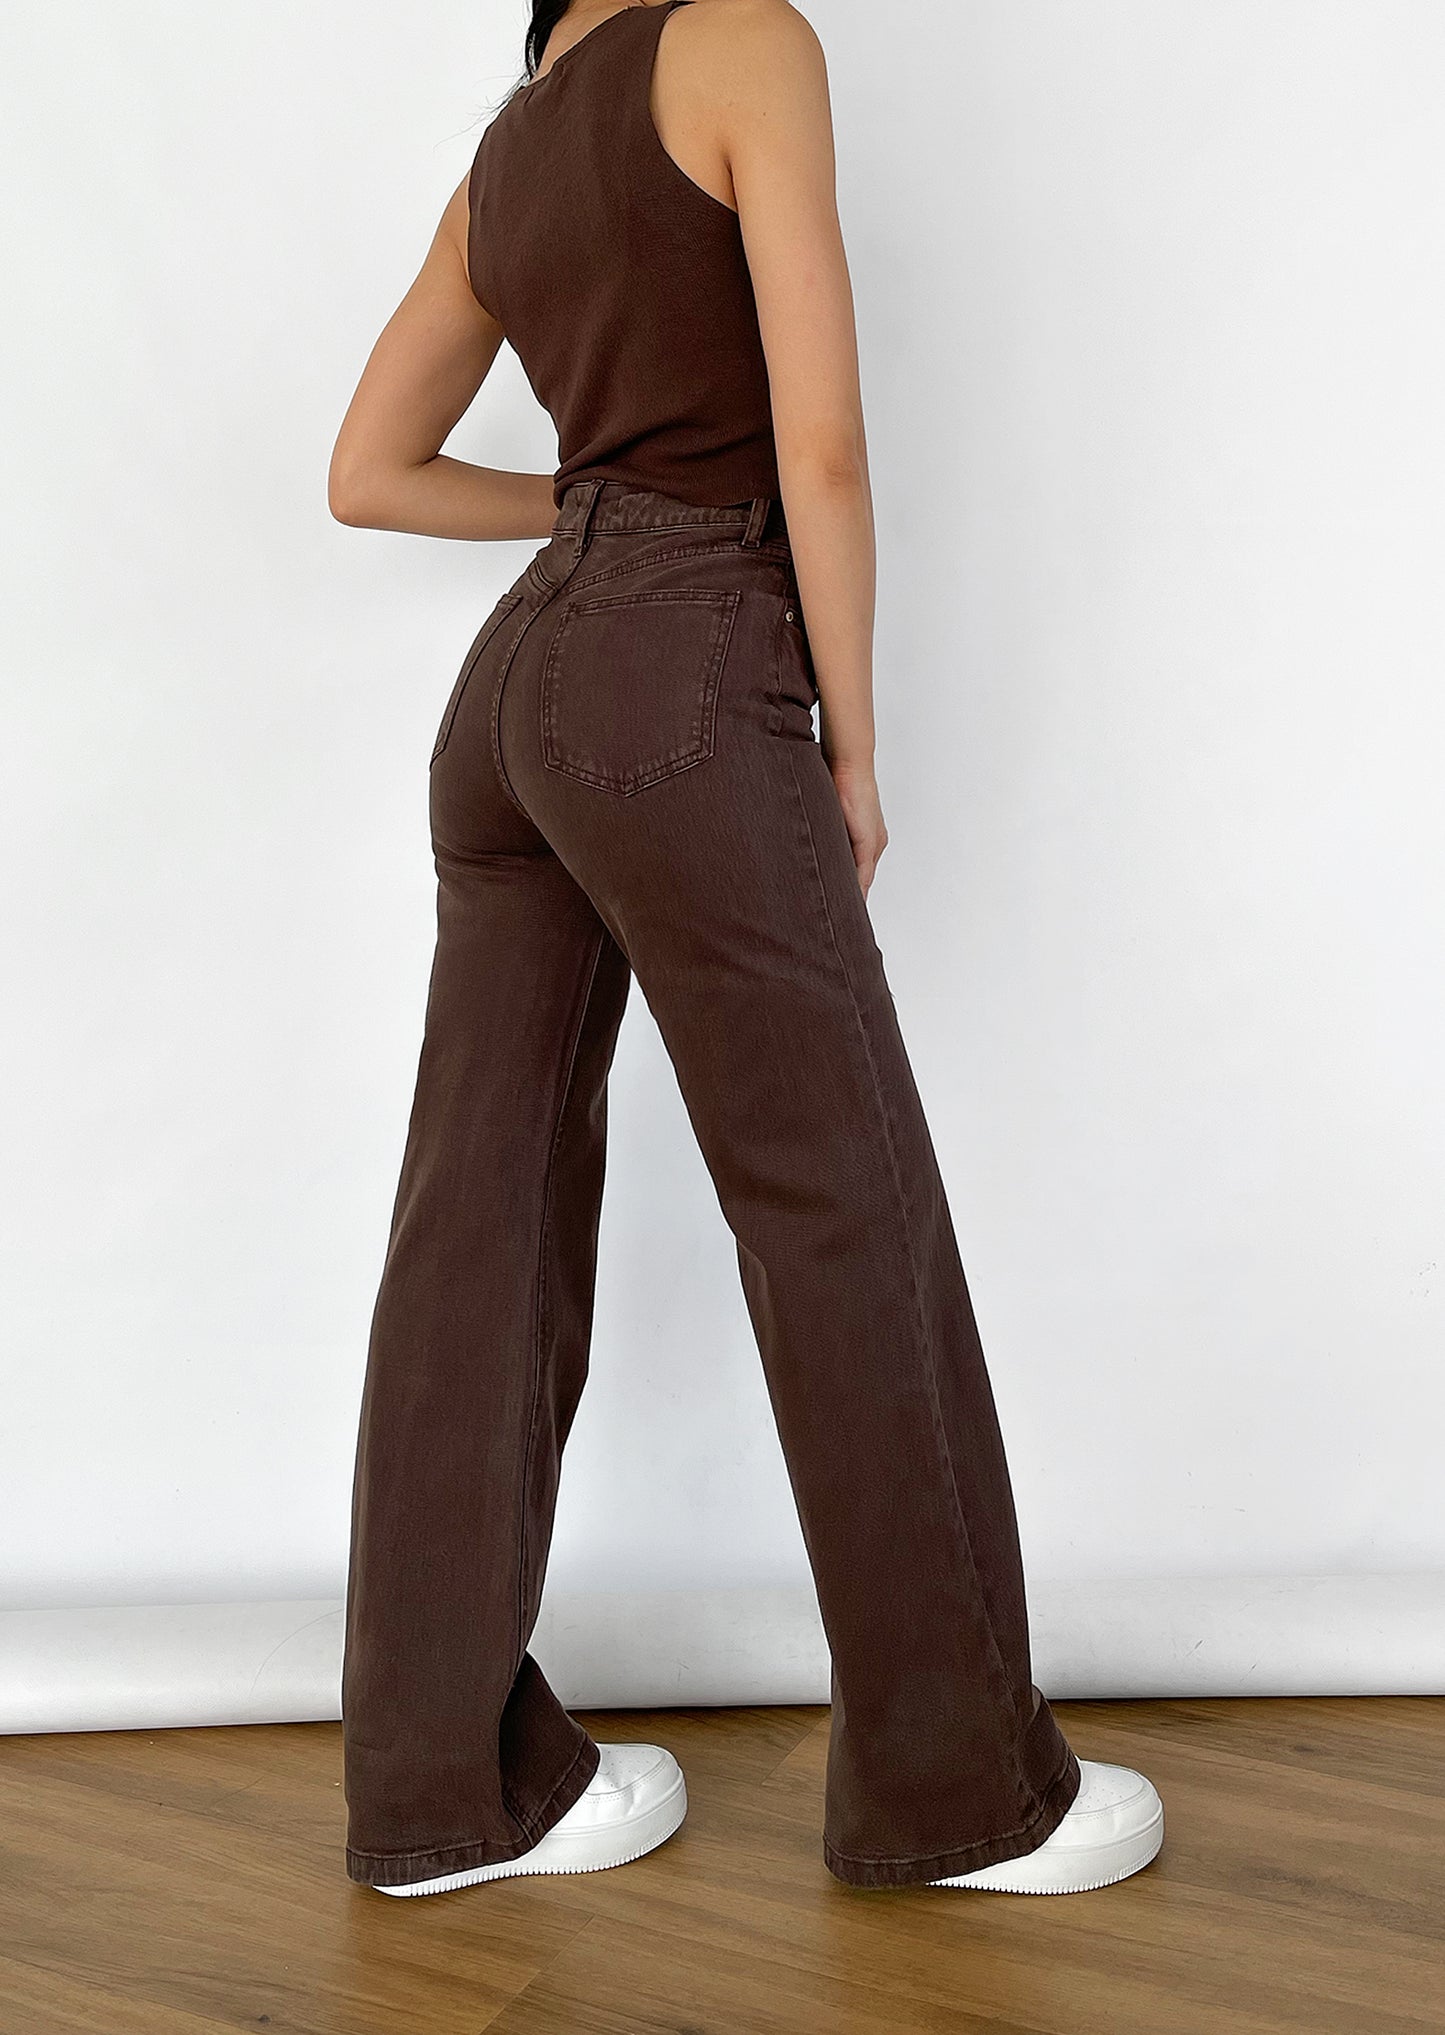 Flare jeans in brown